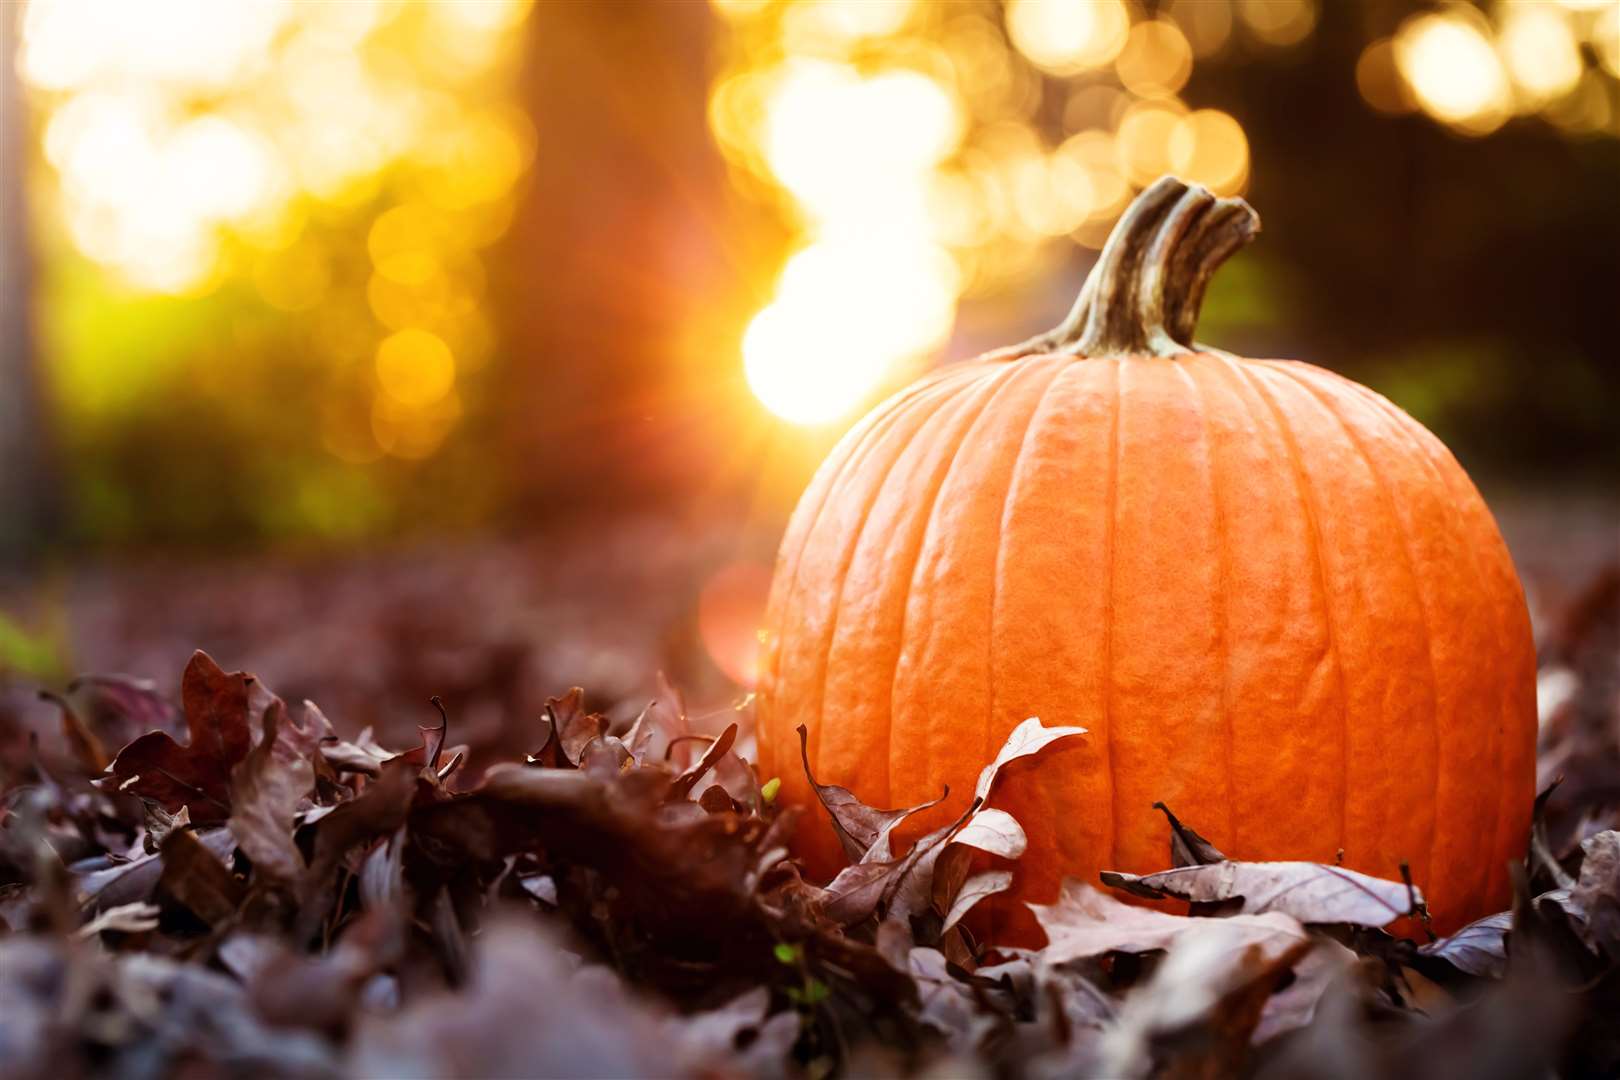 Visitors will can head into the Pumpkin Grotto at Groombridge